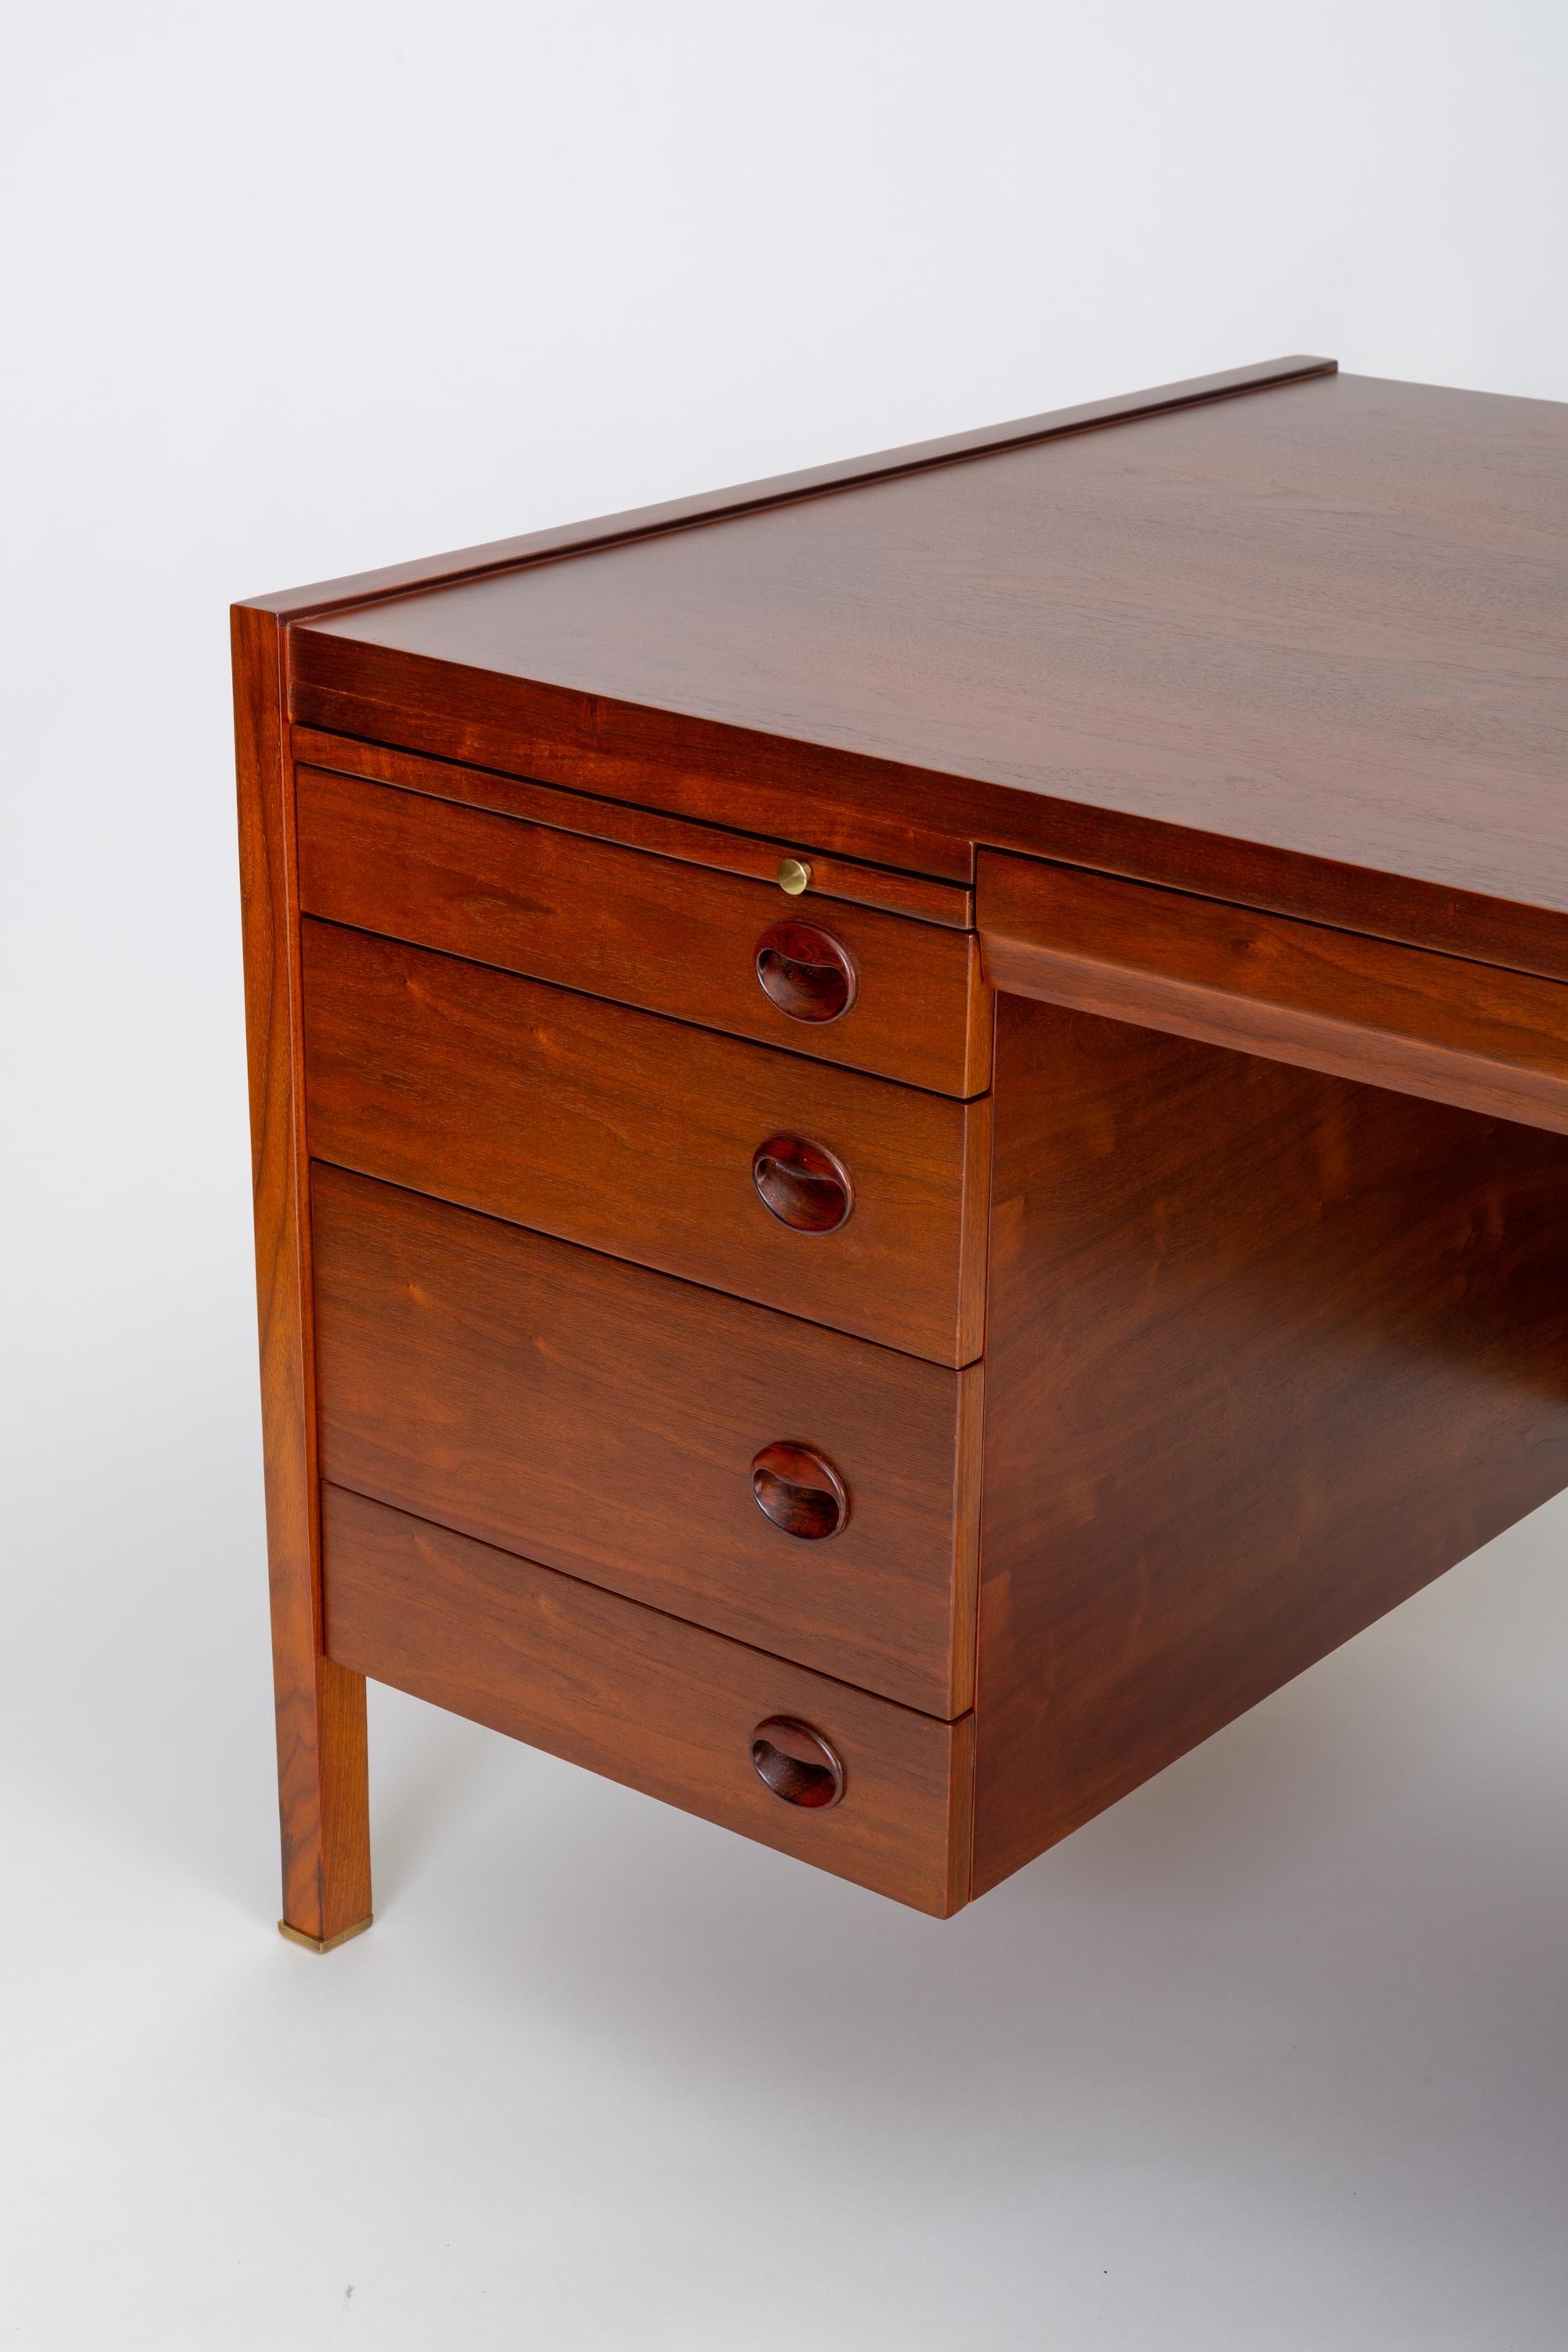 Walnut Executive Desk with Rosewood and Brass Details, Edward Wormley for Dunbar 3